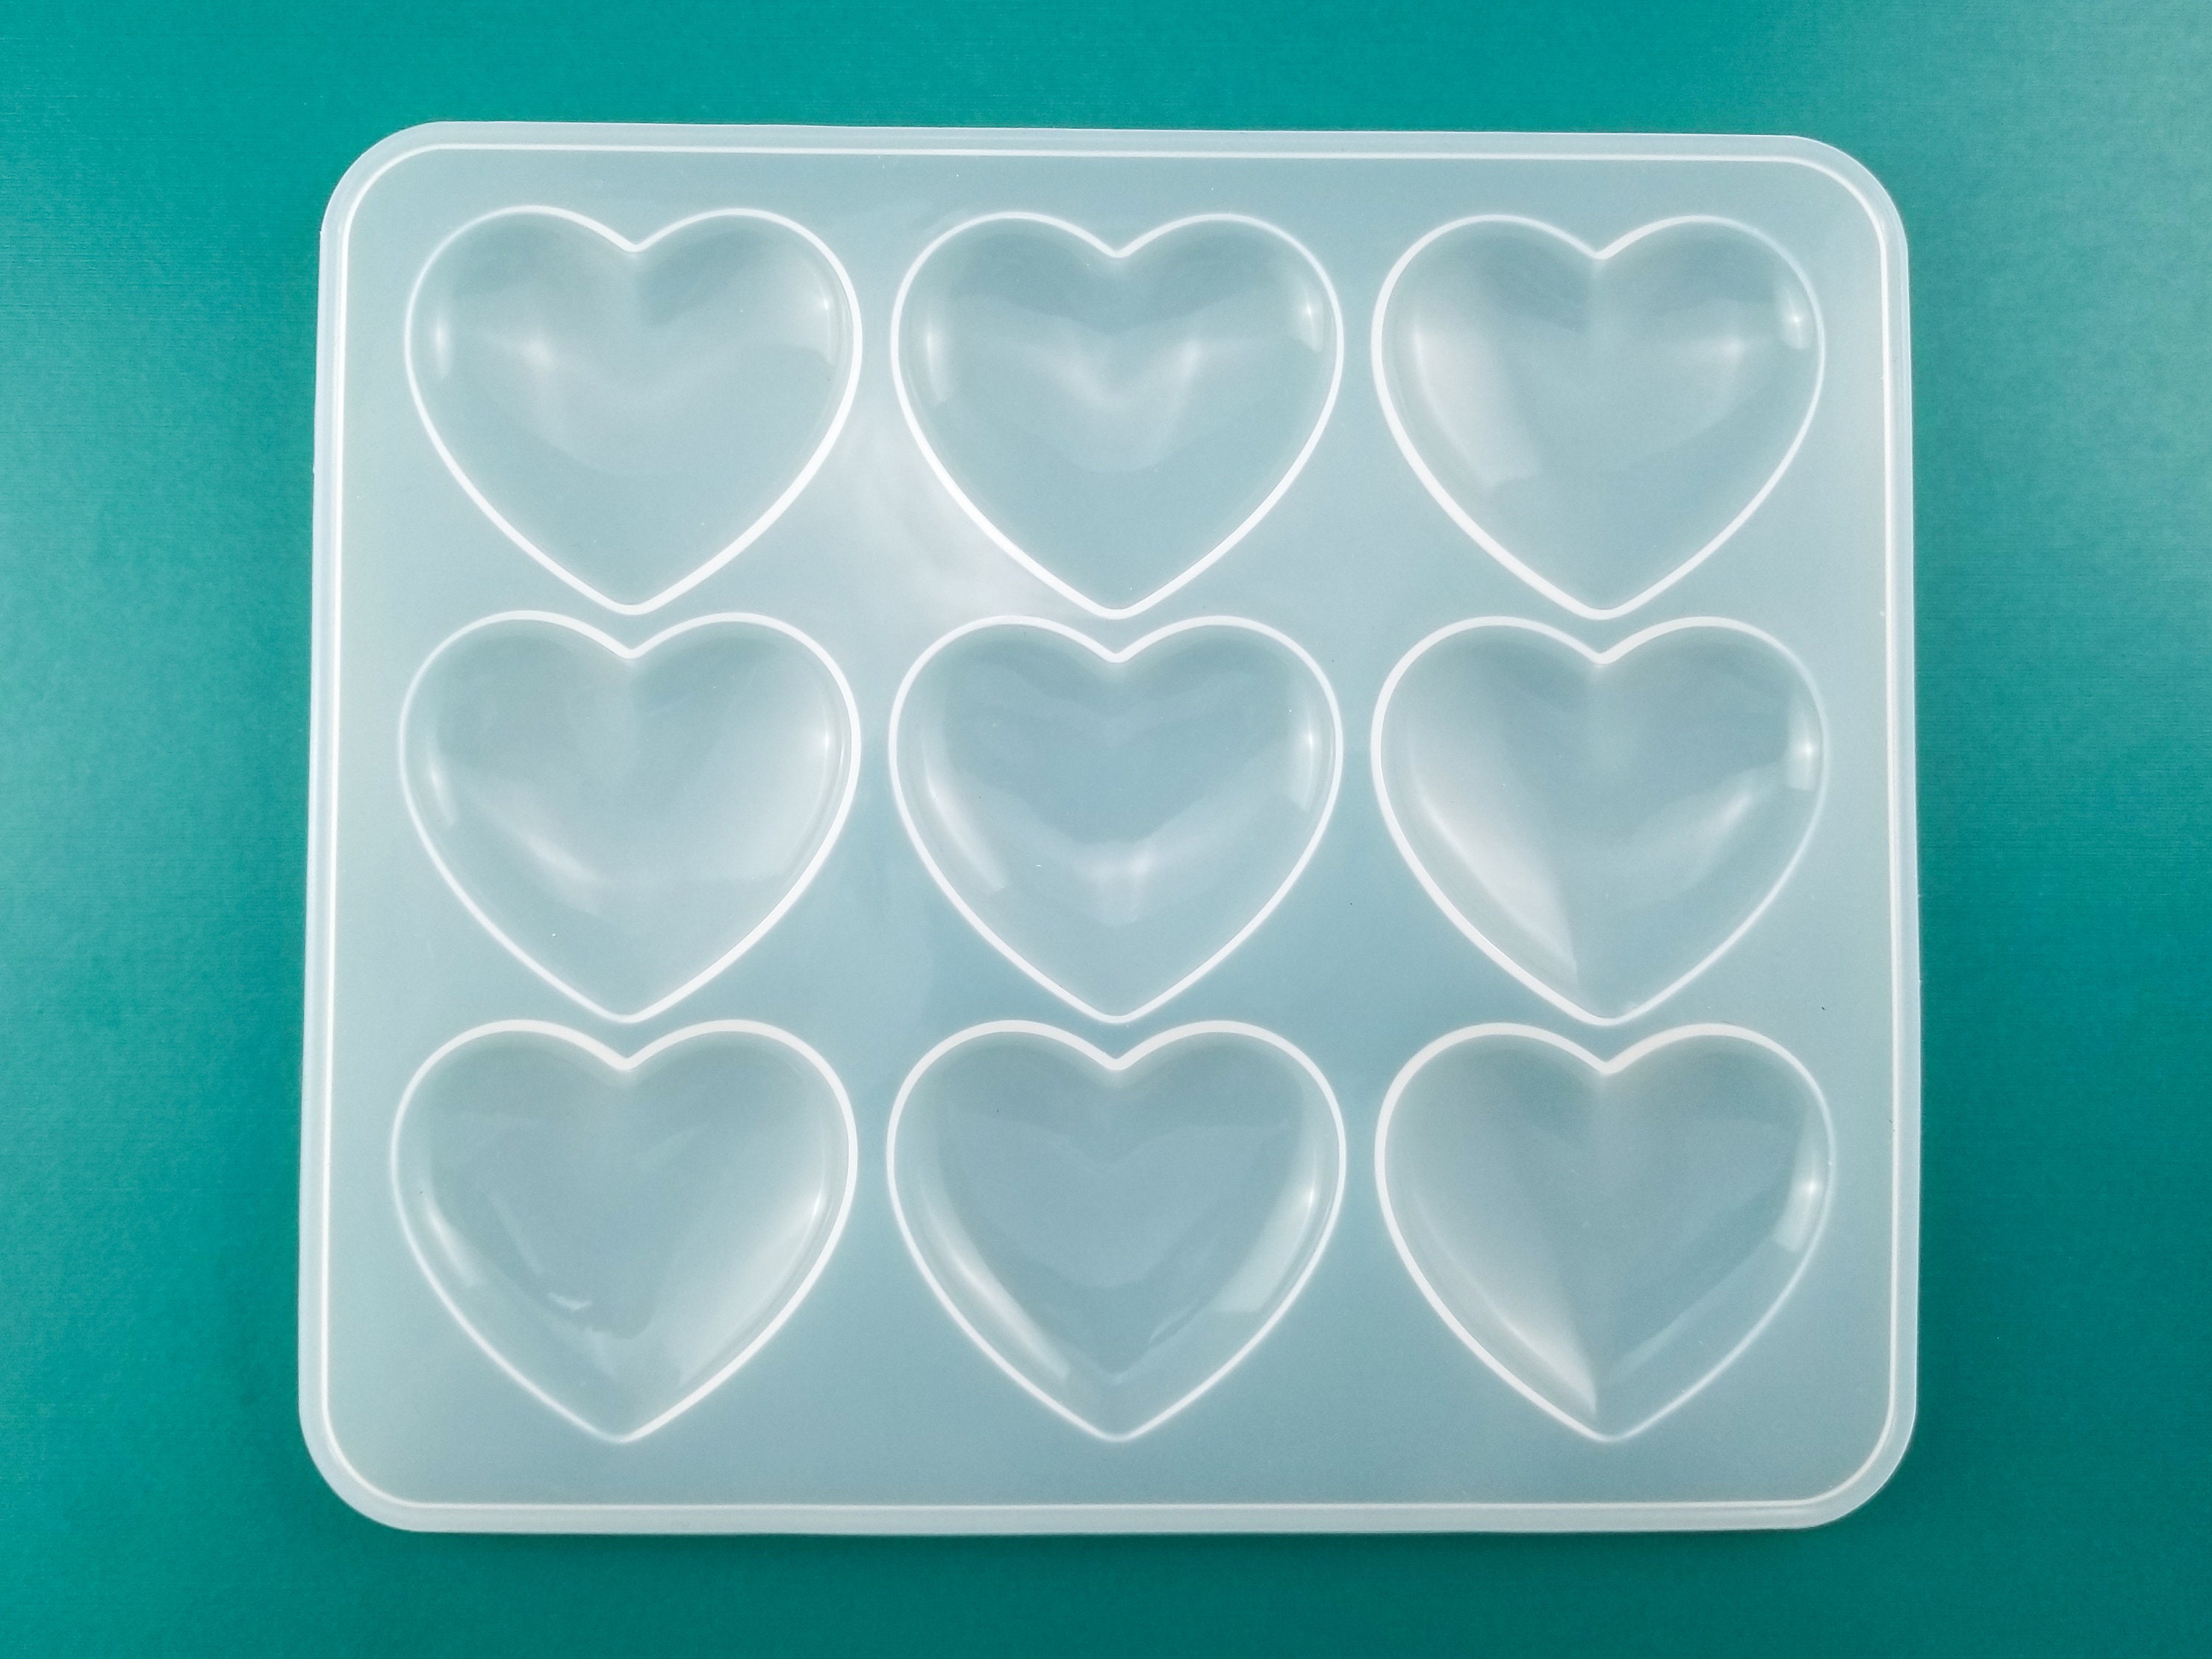 Shiny Puffy Heart Silicone Mold, Clear Puffy Heart Silicone Mold (9  Cavity), Transparent Shiny Mold, UV Resin Mould, Resin Cabochon DIY